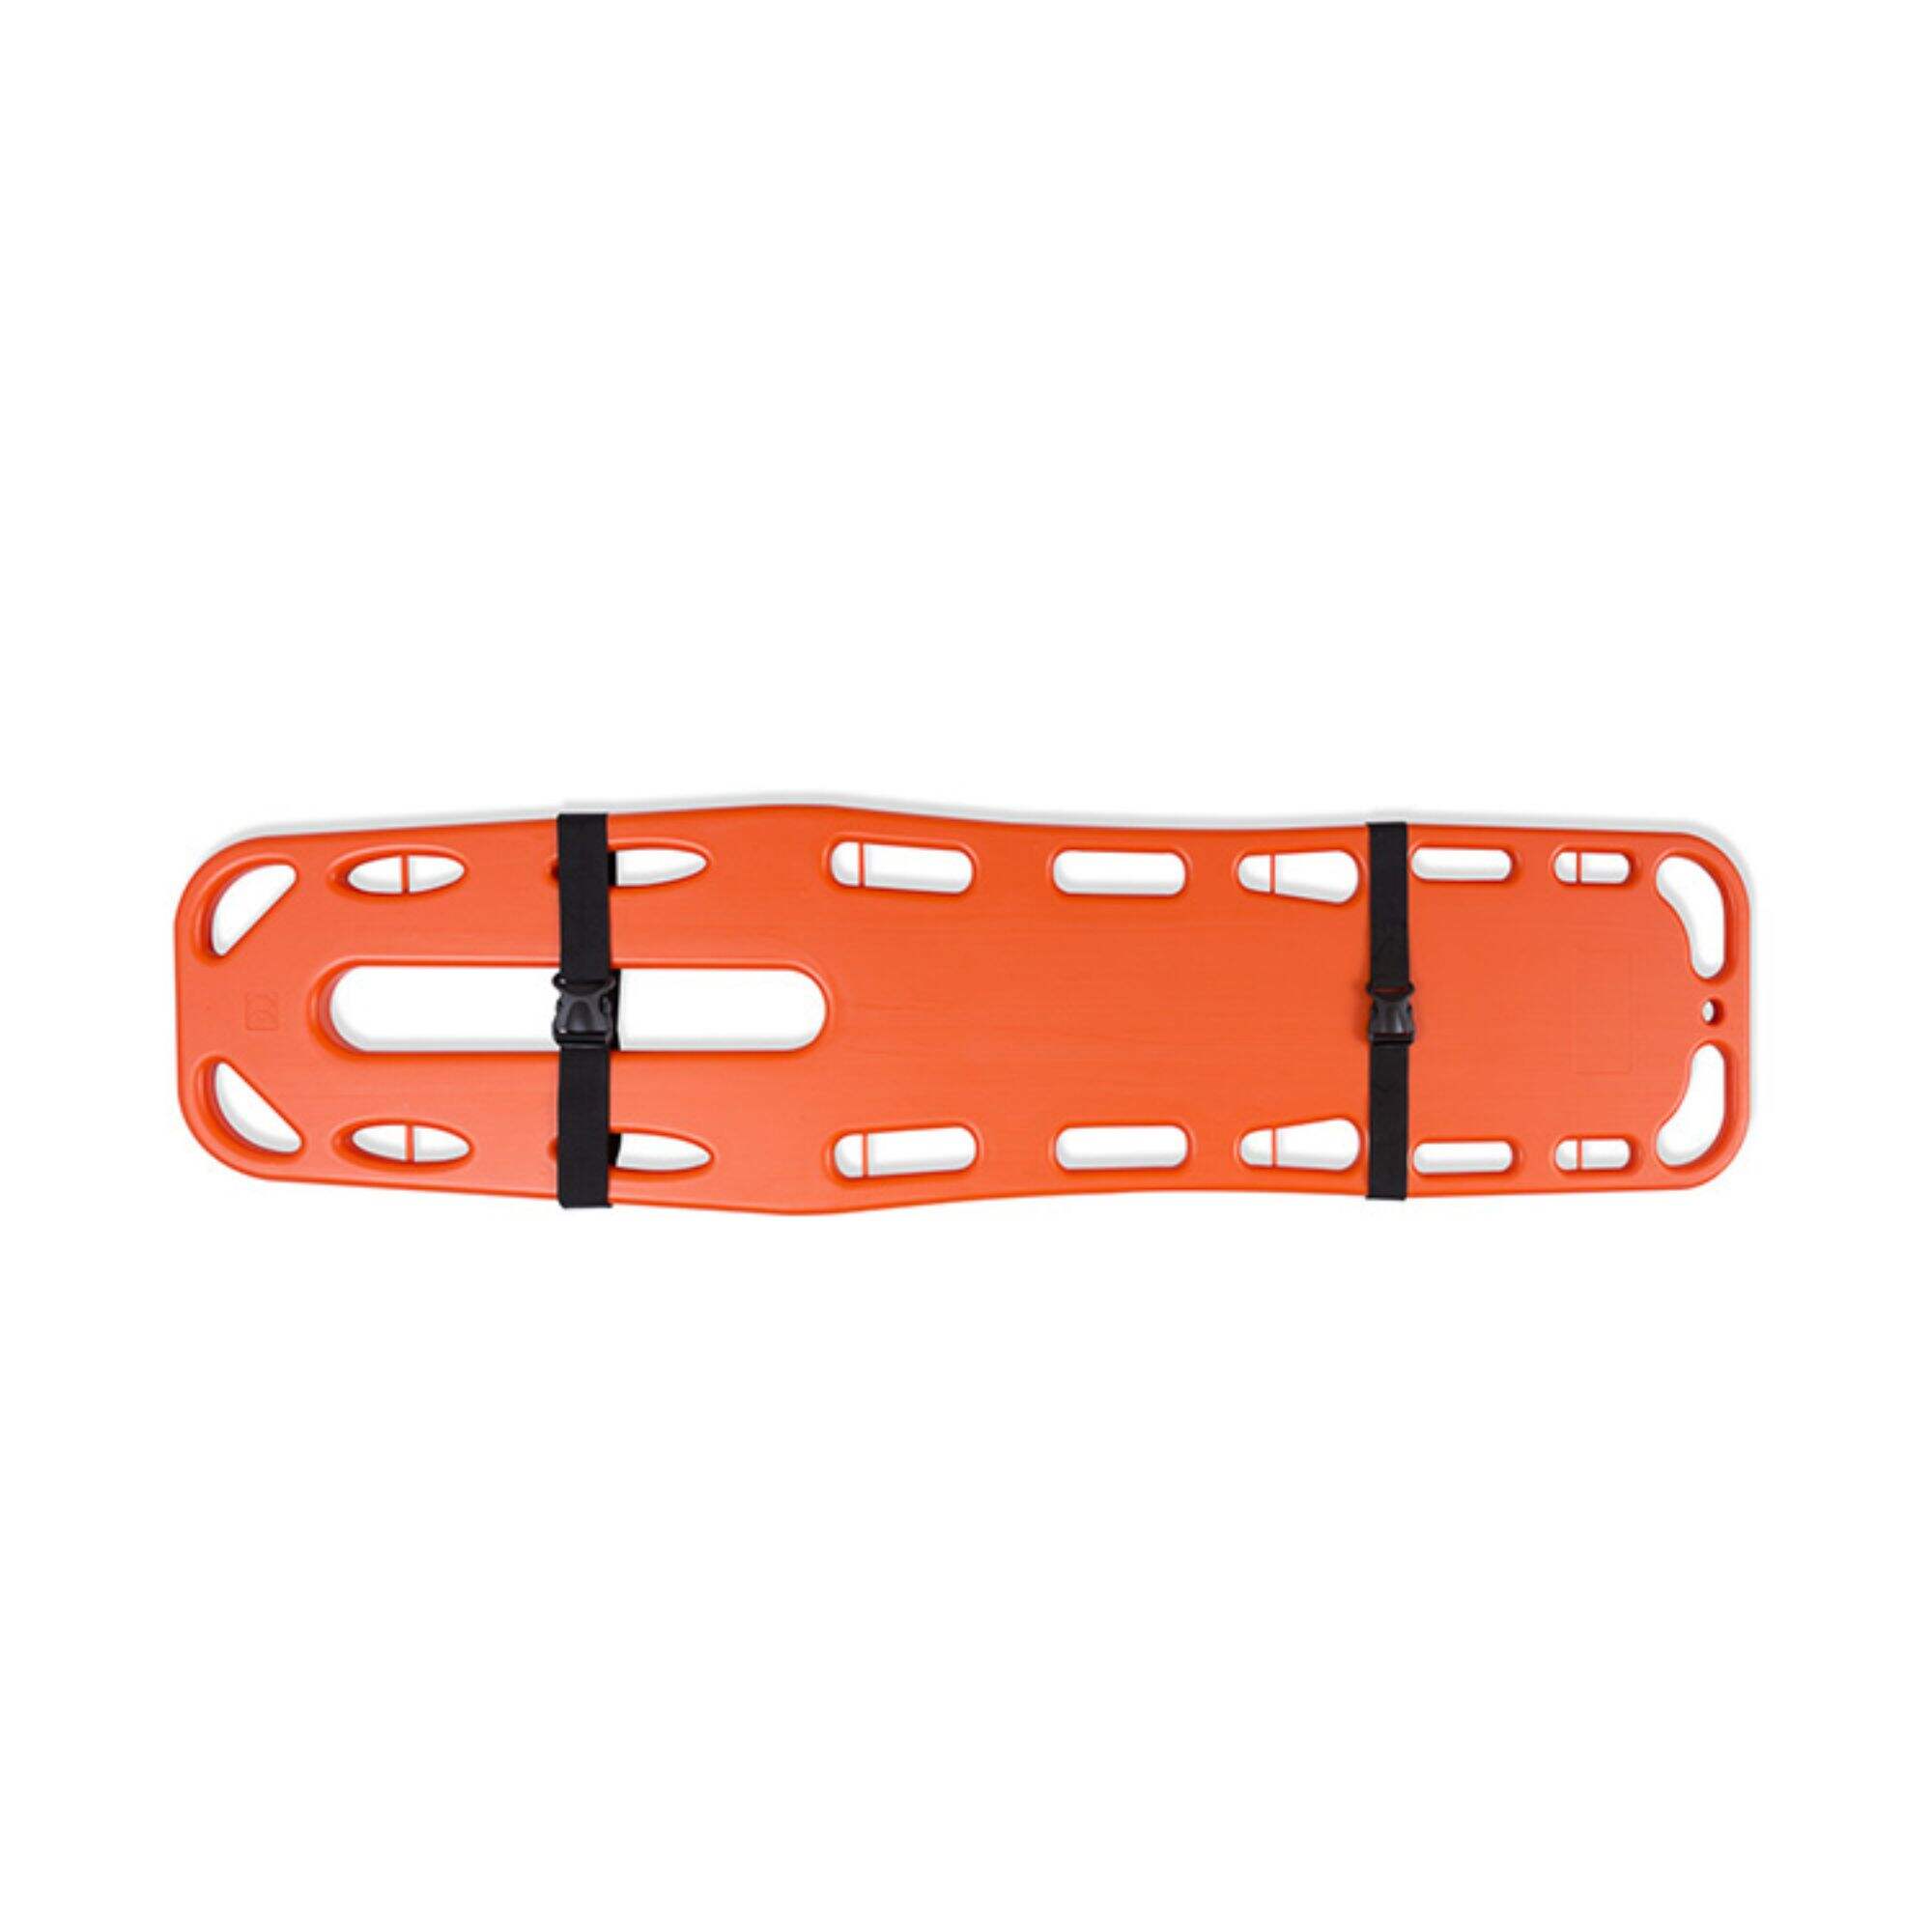 YXH-1A6A Spine Board Stretcher with Spider Straps